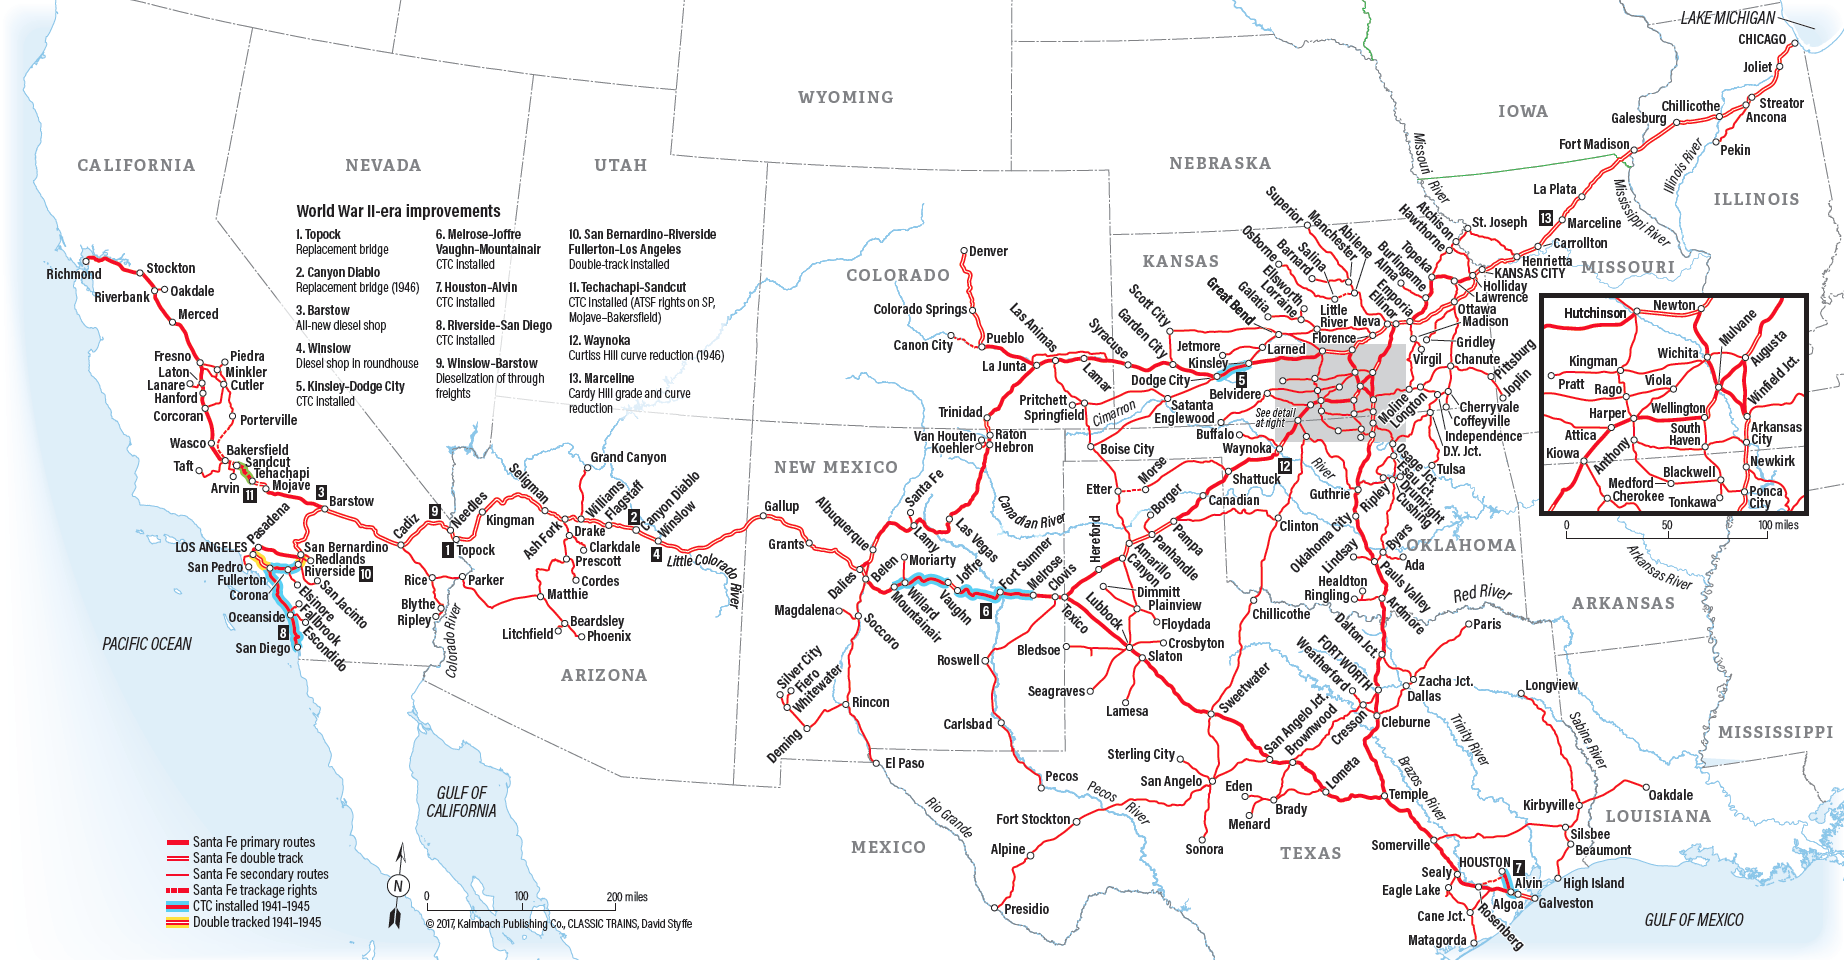 A map of the Santa Fe Railways' major routes and cities.